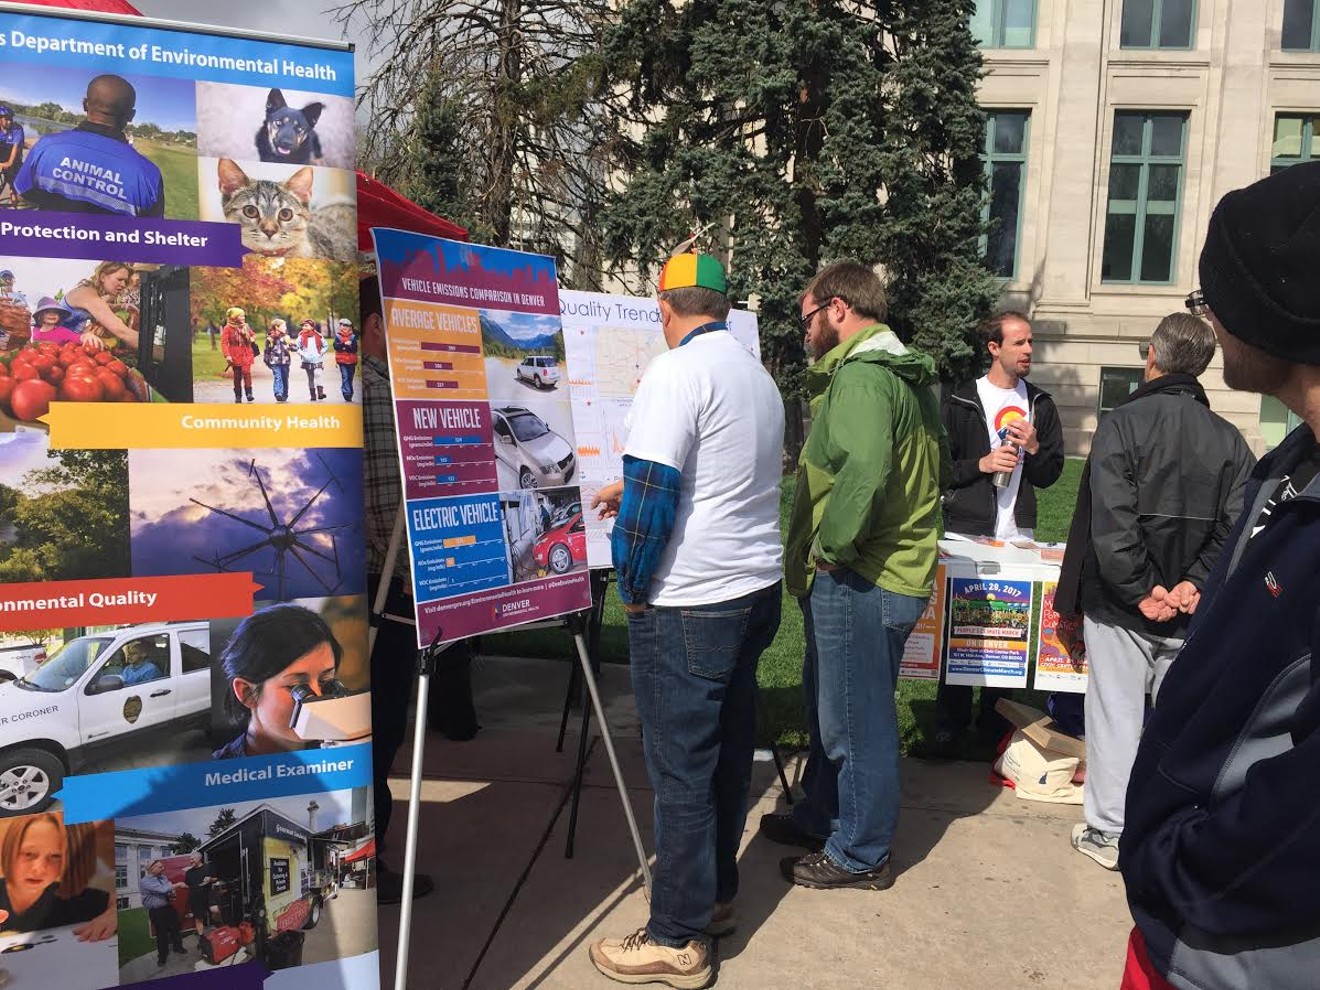 Denver Environmental Health participated in the March for Science.